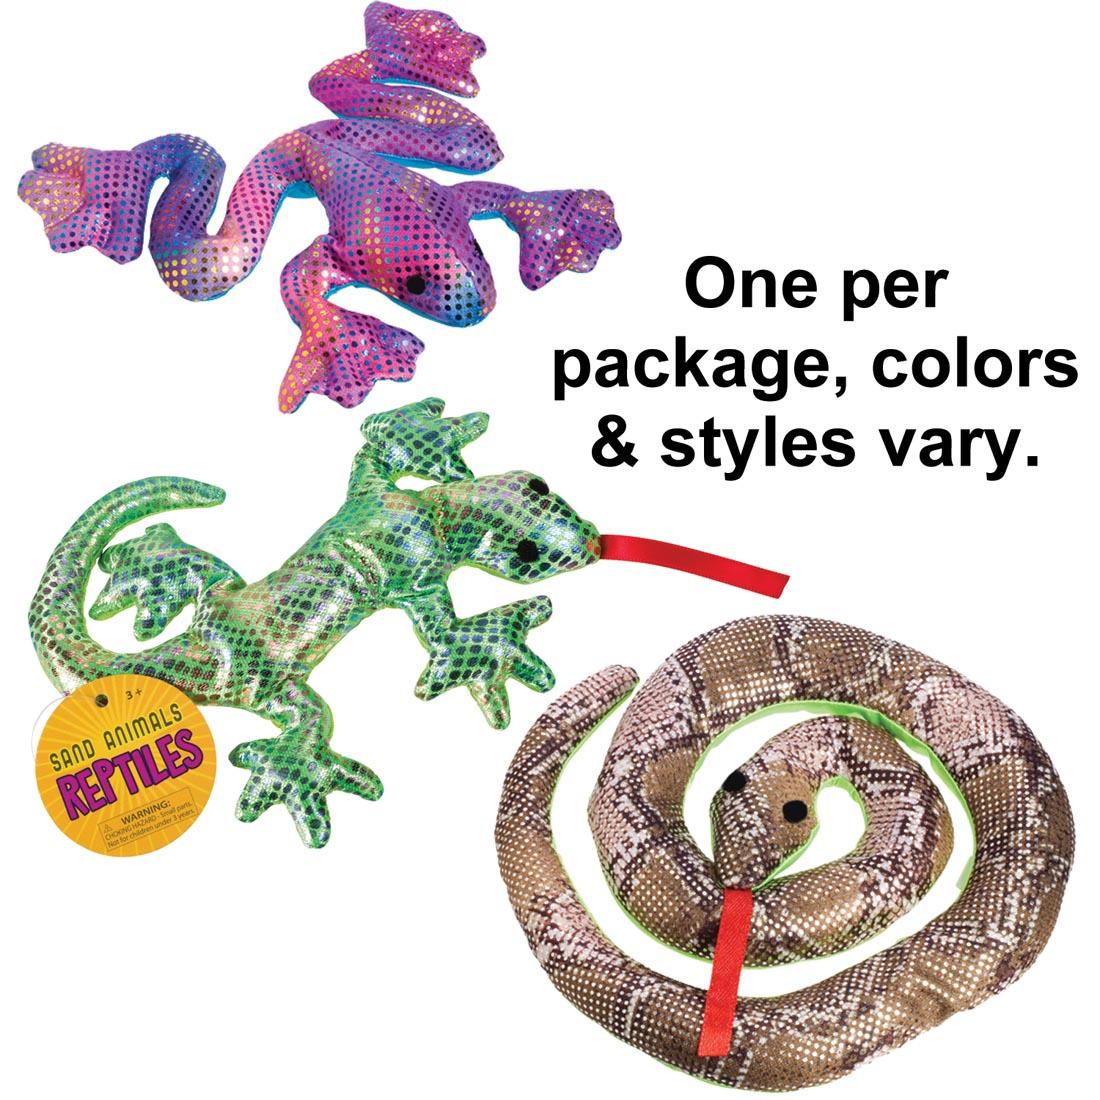 Three different Sand Animals Reptile Toys with the text One per package, colors & styles vary.